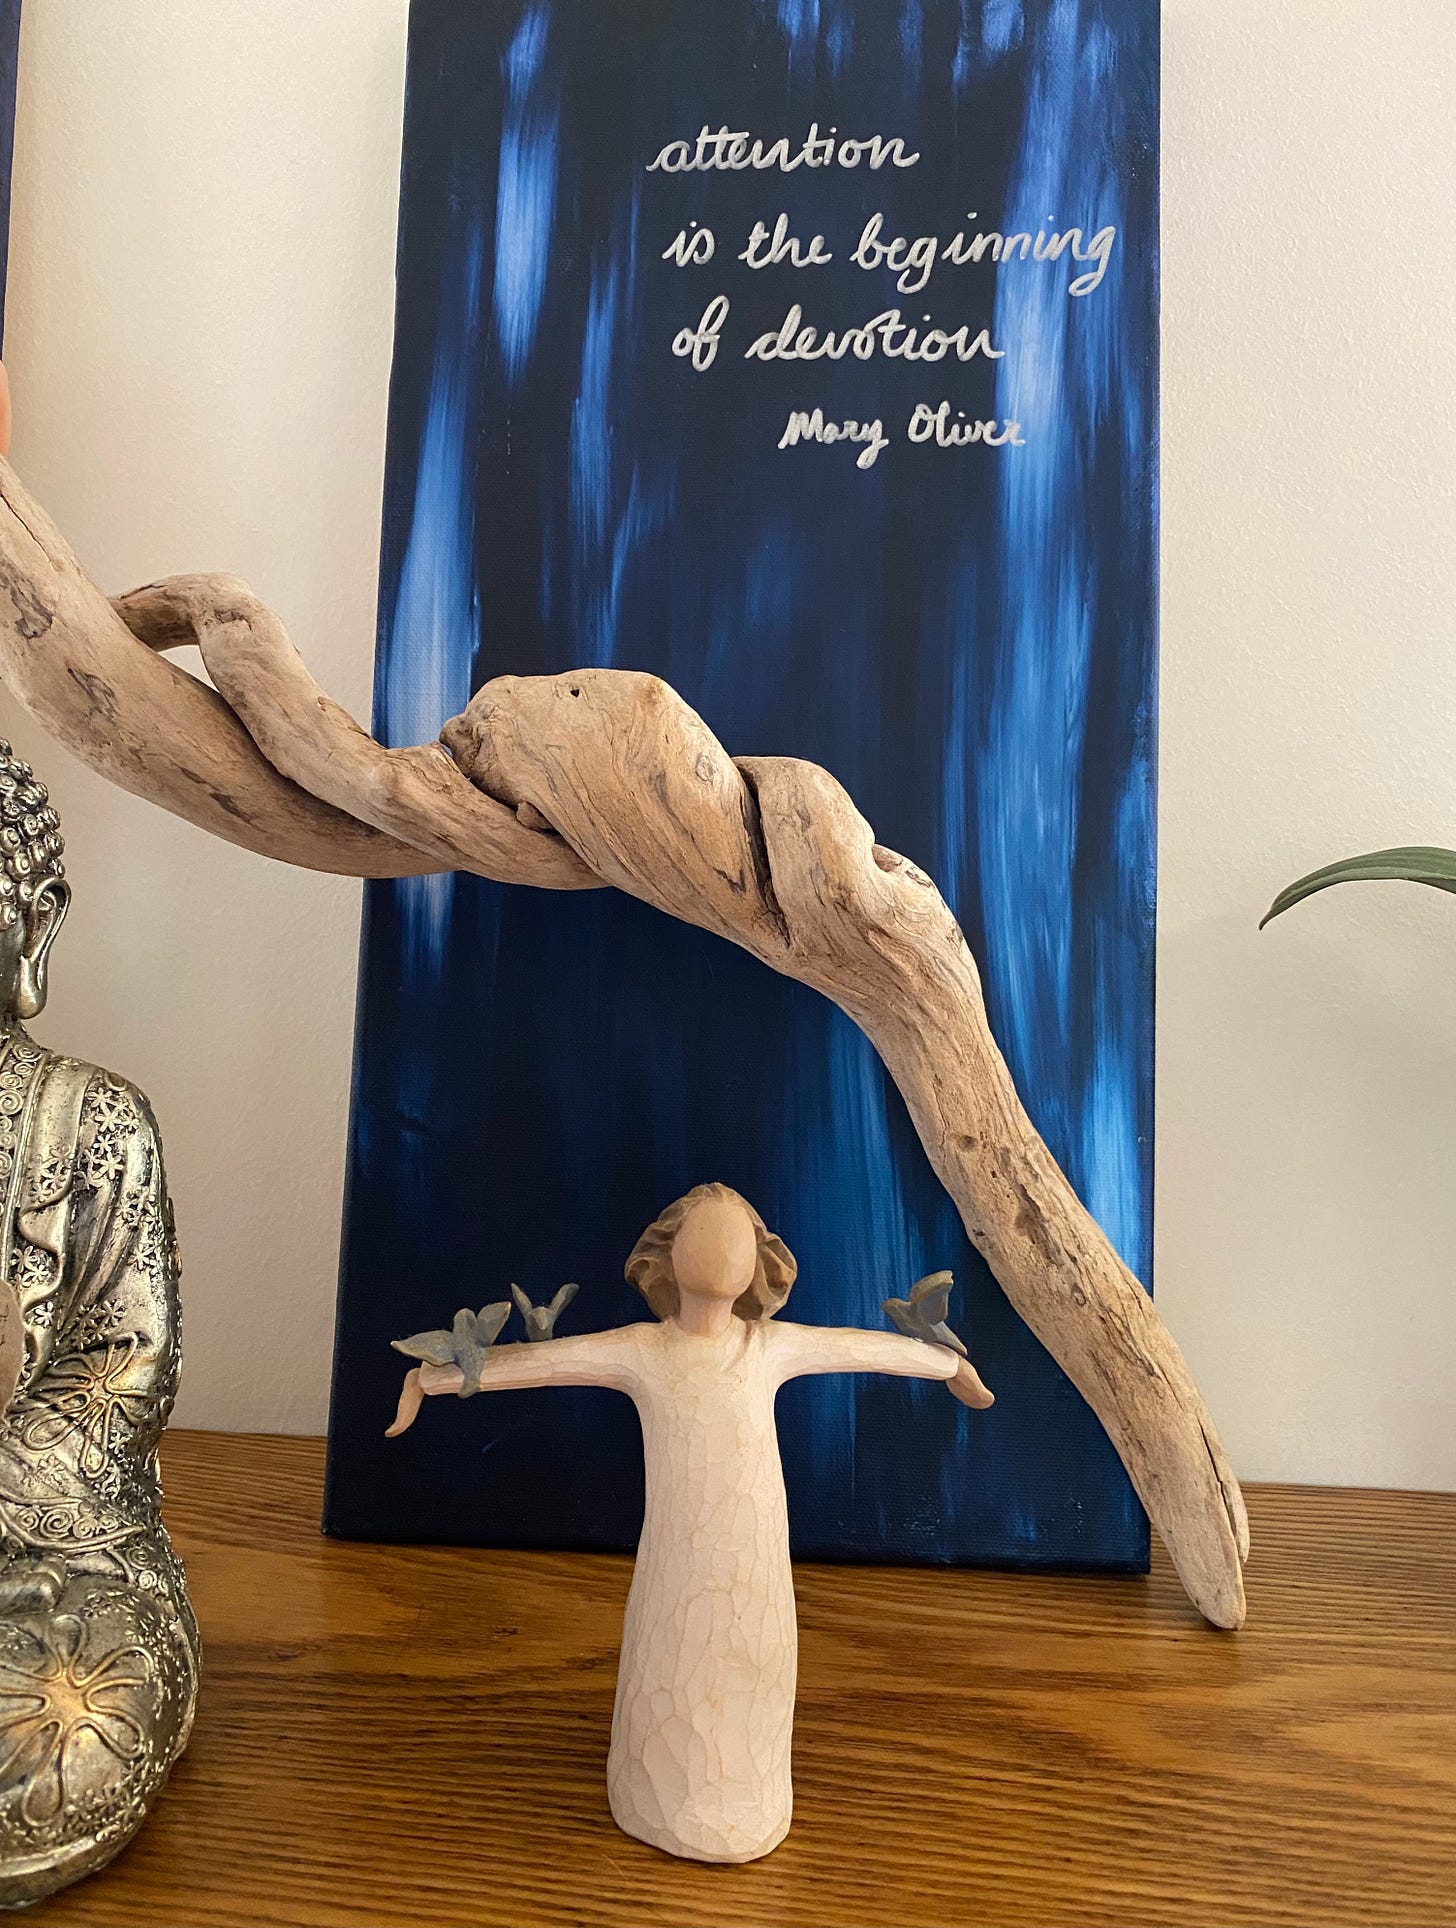 a statuette of a woman with arms outstretched holding blue birds on each arm, beneath a blue canvas with the words "attention is the beginning of devotion Mary Oliver" written on it. A sliver of a silver seated Buddha is visible to the left of the image